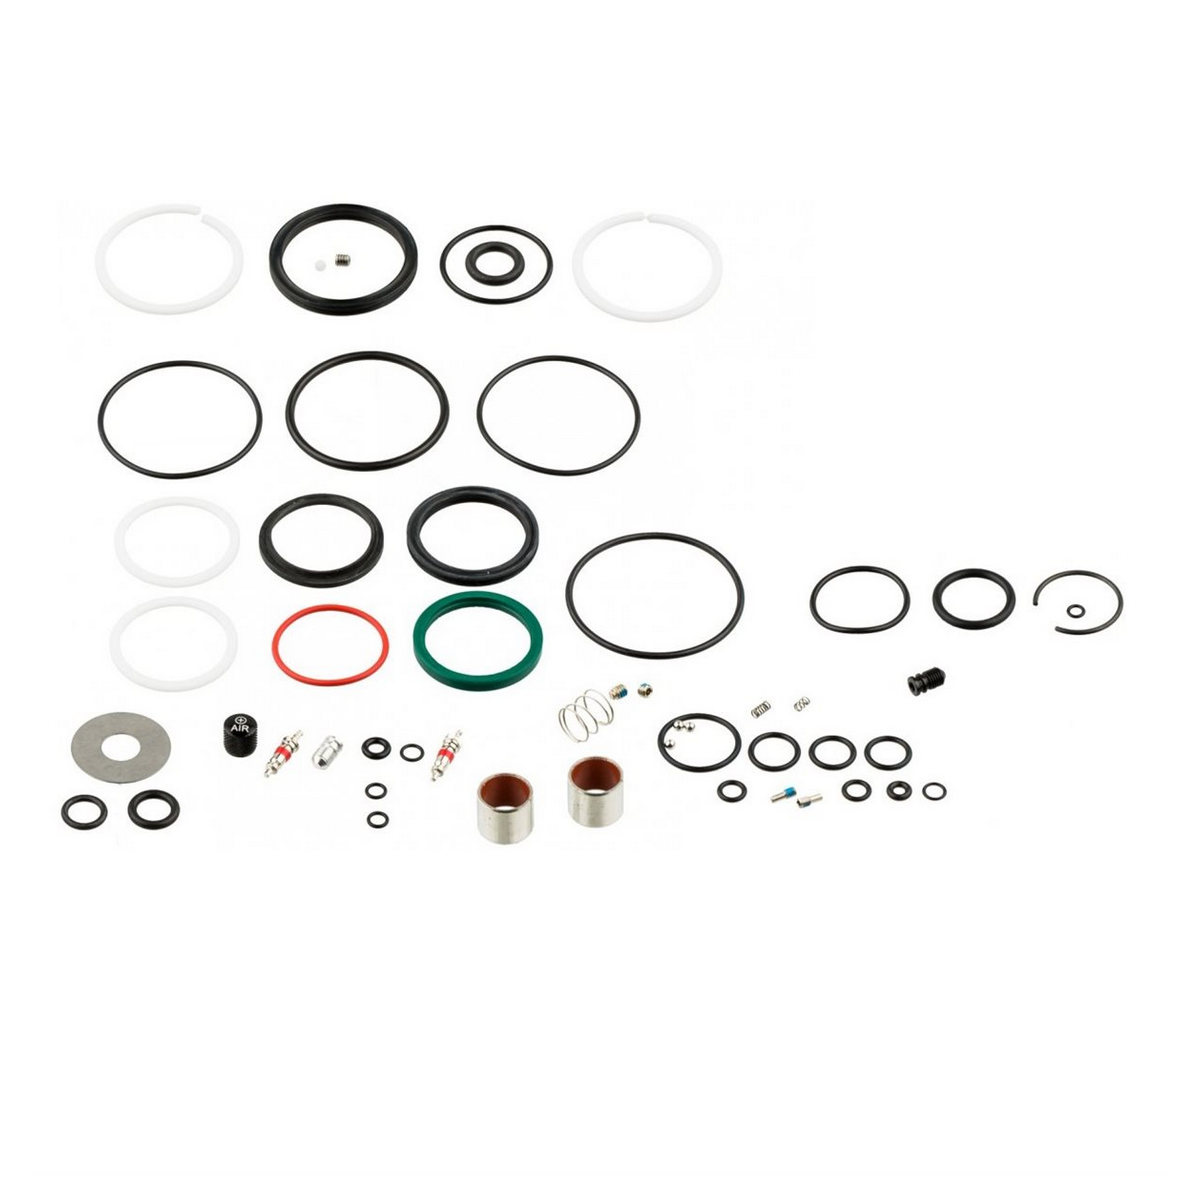 Service kit basic for Monarch RT3 / RT / RL / R from 2014